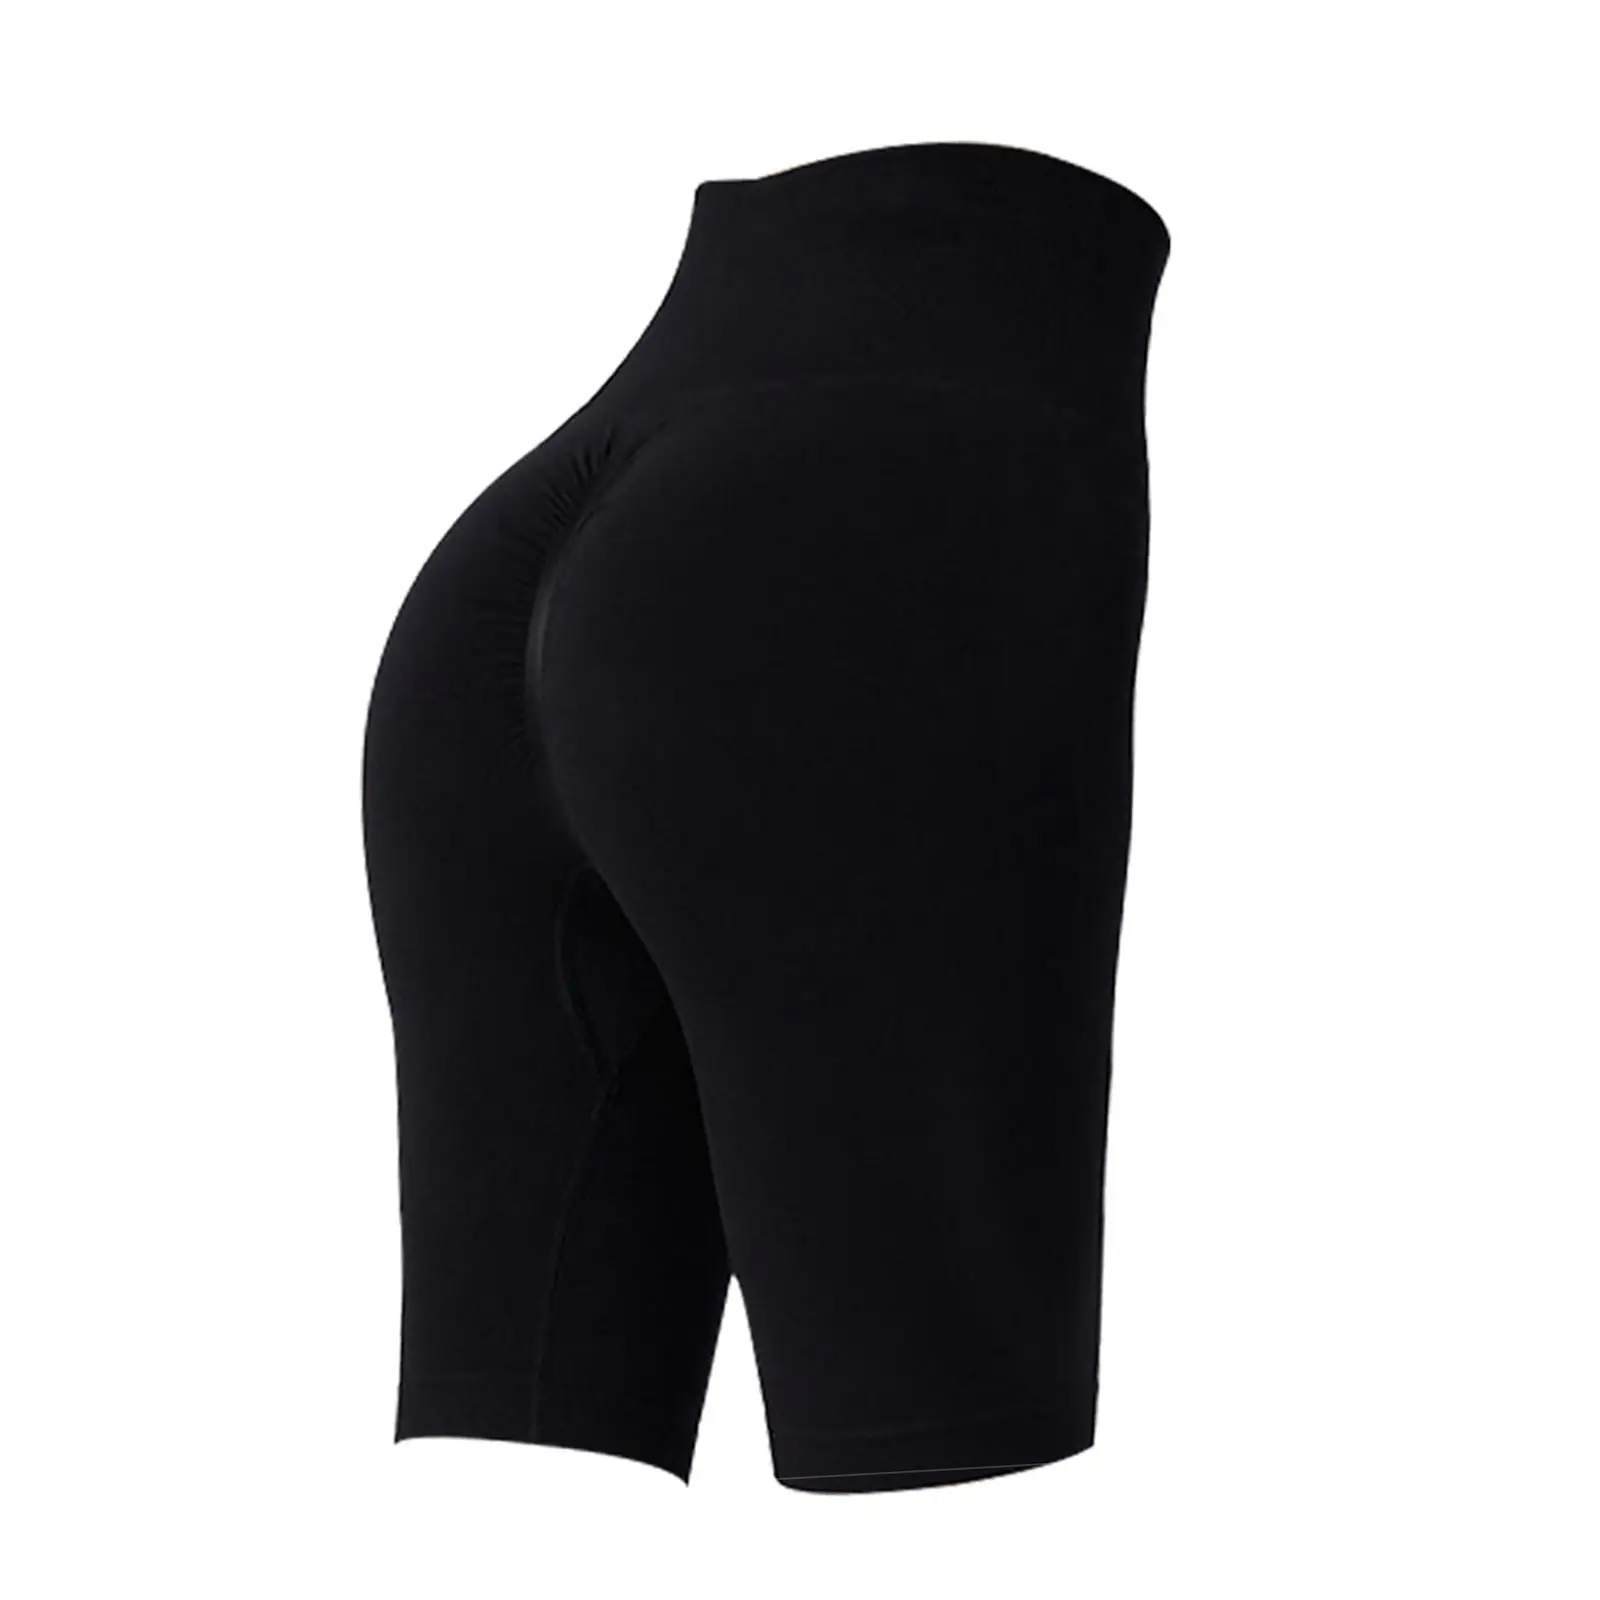 Women Cycling Shorts Leggings Streetwear Casual Tummy Control Breathable Quick Dry for Cycling Riding Sports Exercise Biking